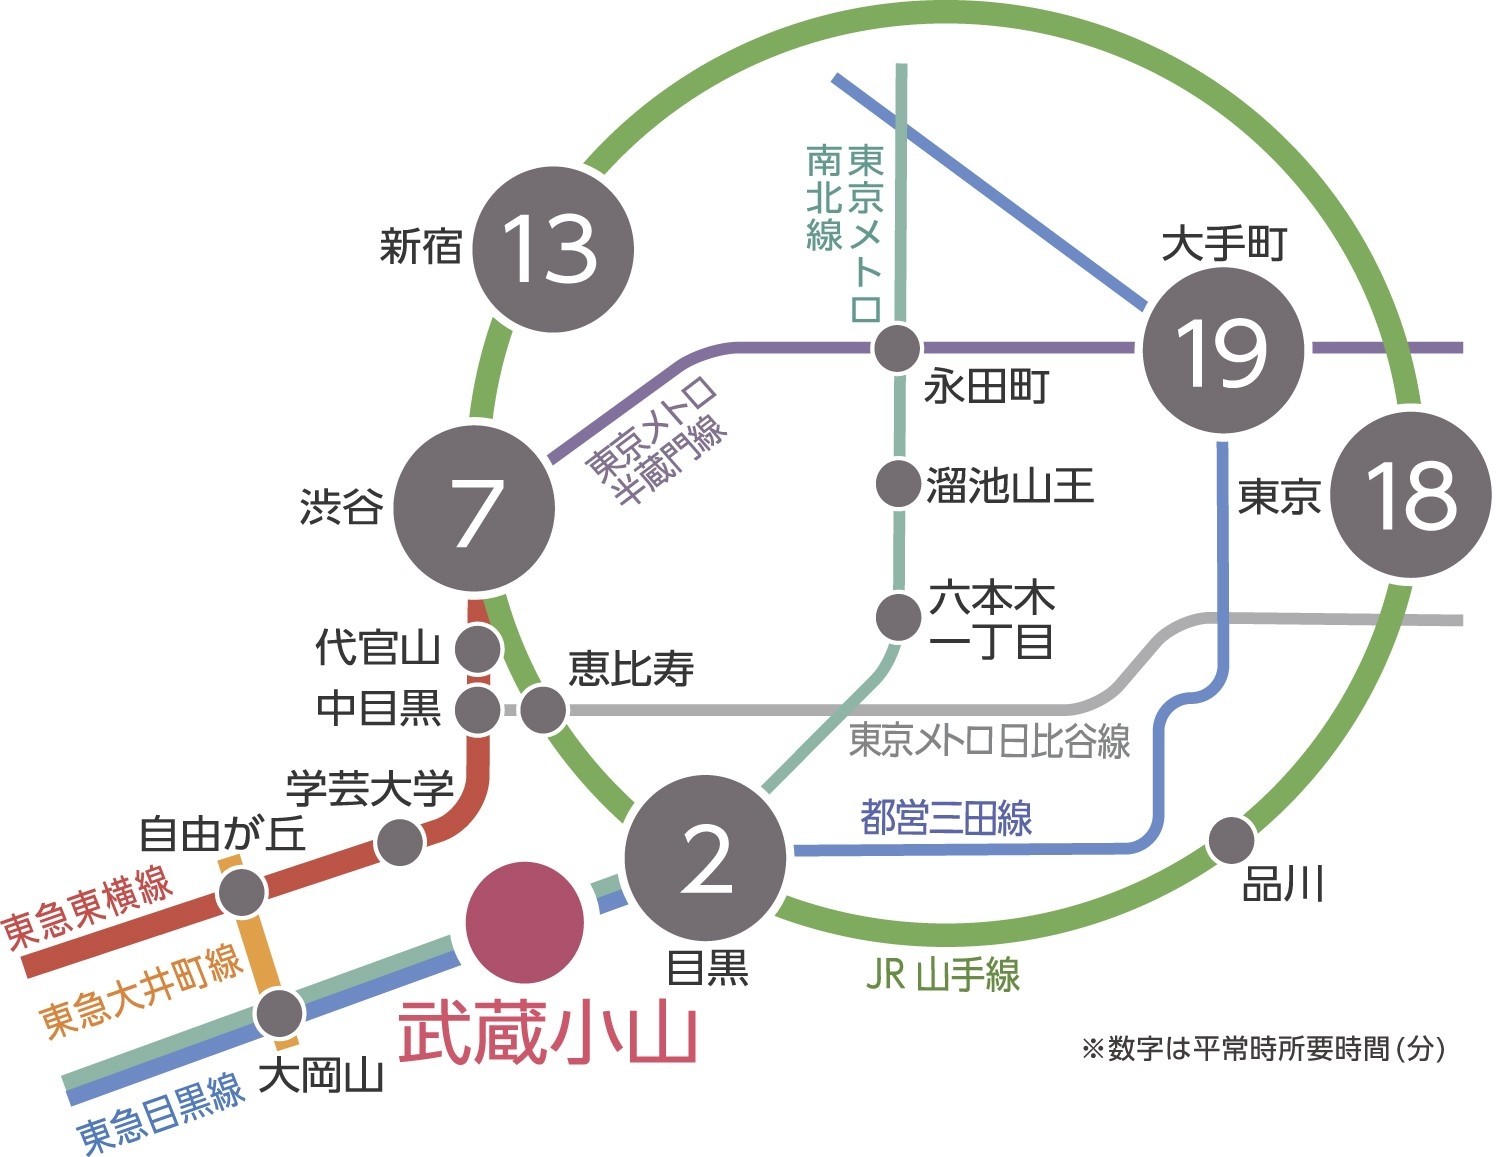 Traffic view. The time required from "Musashi Koyama" station numbers. (October 2012 currently)